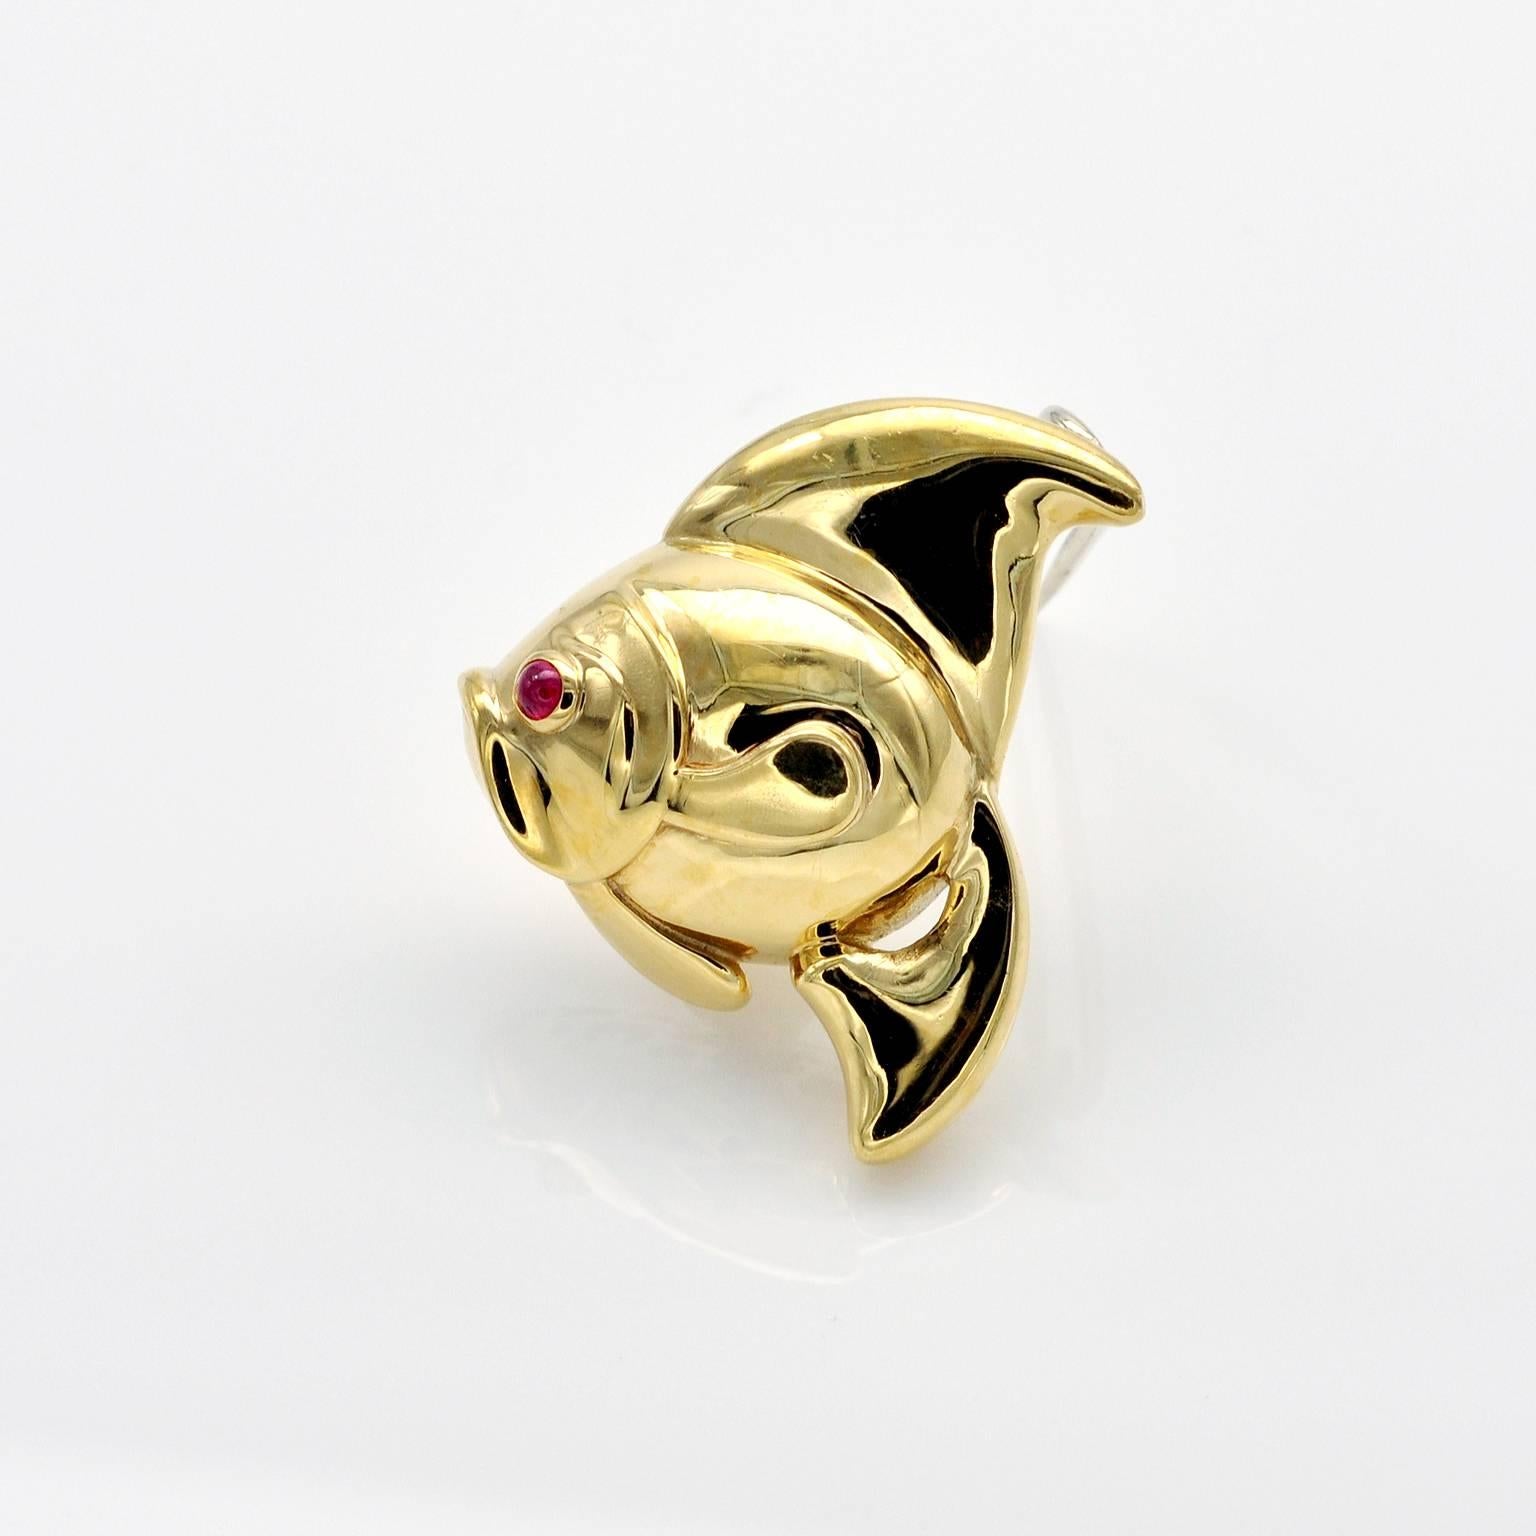 Exquisite  brooch! the Fish is nice, rounded and... so precious!
The brooch is 18 kt gold with a round ruby cabochon for the eye. 
On the back hearts, stars and moons are cut in the gold lining.
Exquisite work.
French state hallmark .